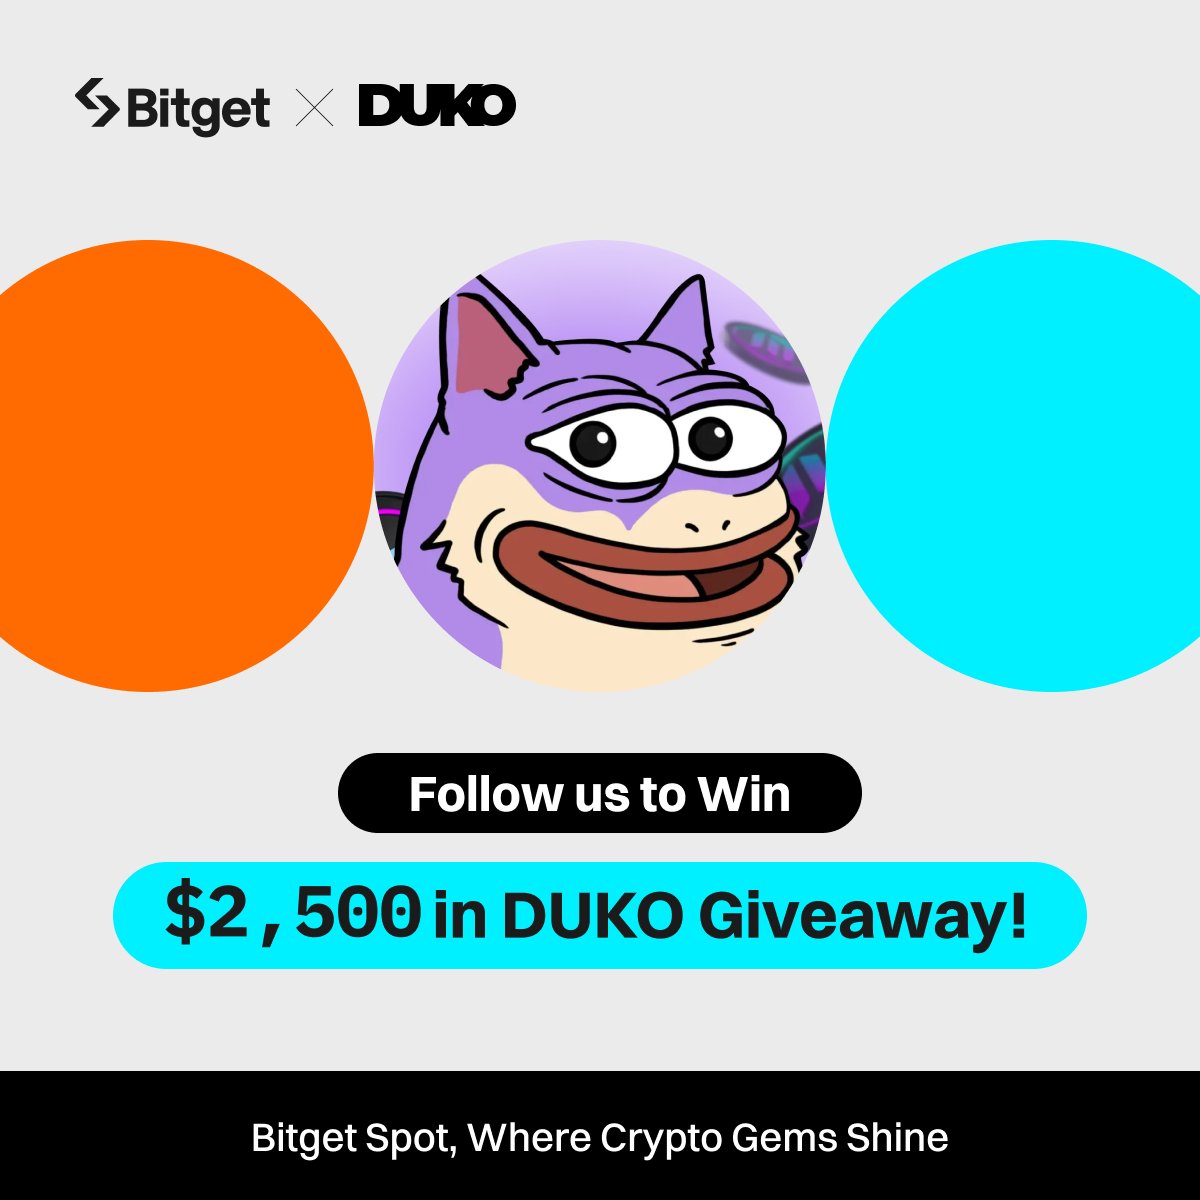 Join the #Bitget x #DUKO Giveaway! 💰 $2,500 worth of $DUKO (50 winners) 1️⃣ Follow @bitgetglobal @dukocoin 2⃣ Repost with #DUKOxBitget & tag your friends 3⃣ Fill out the form: forms.gle/jAy7EgdincZoH4… 4⃣ Join t.me/BitgetENOffici…